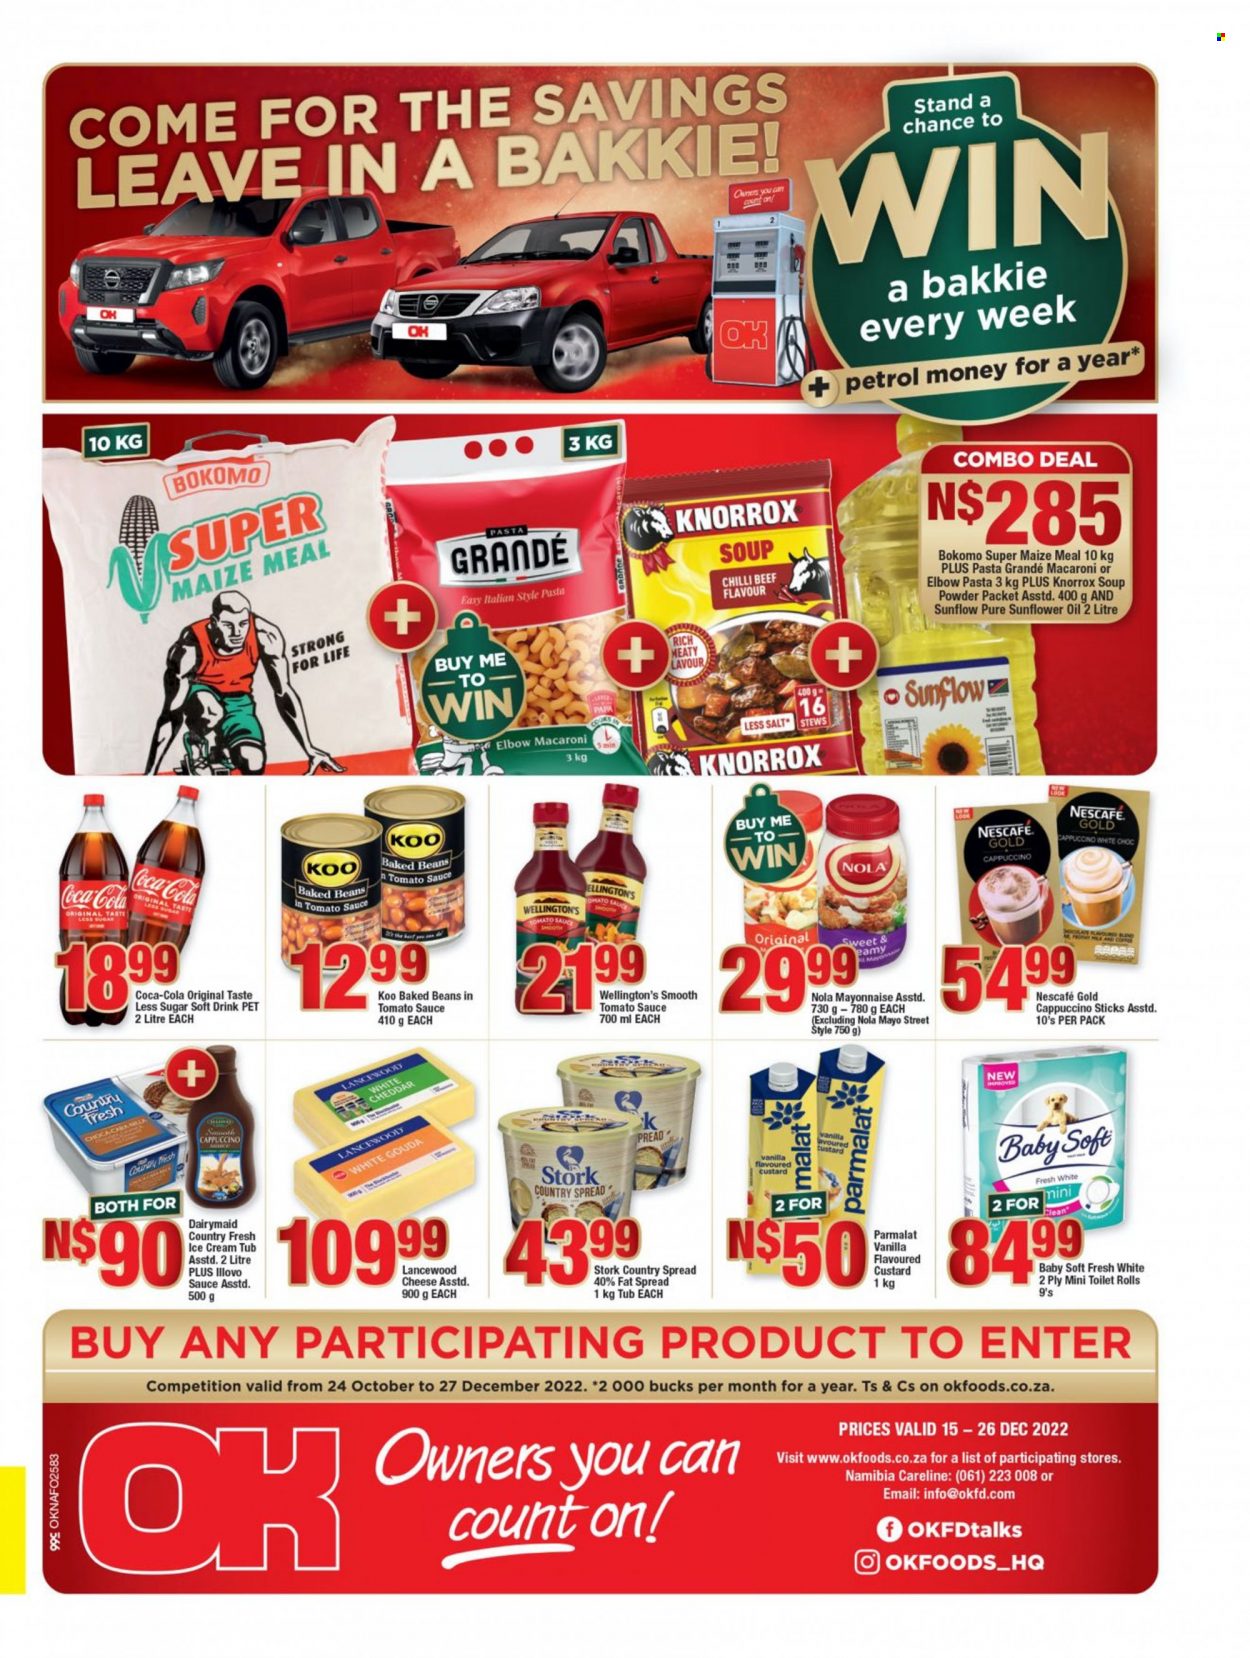 thumbnail - OK catalogue  - 15/12/2022 - 26/12/2022 - Sales products - macaroni, soup, pasta, gouda, cheddar, cheese, Lancewood, custard, Parmalat, milk, fat spread, mayonnaise, ice cream, maize meal, Knorrox, baked beans, Koo, Pasta Grandé, sunflower oil, oil, Coca-Cola, soft drink, cappuccino, coffee, Nescafé. Page 1.